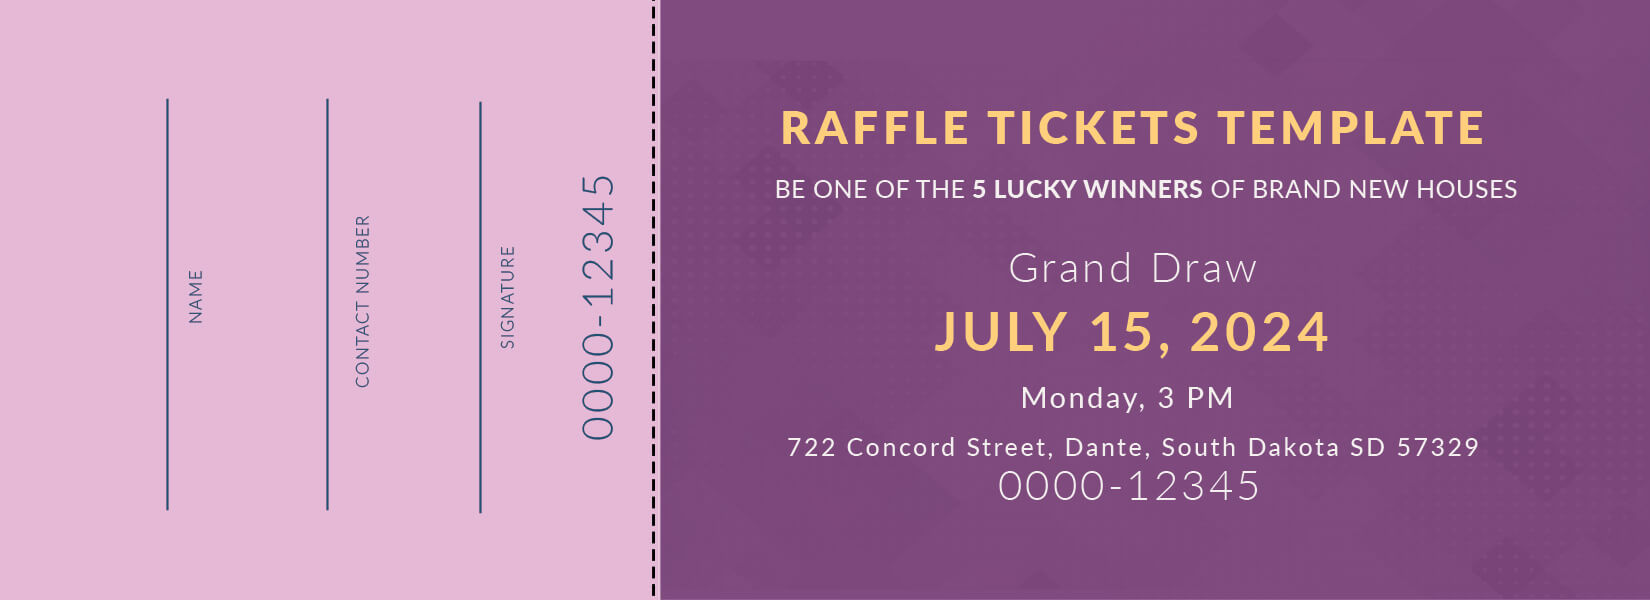 raffle tickets template Templates PSD Free file